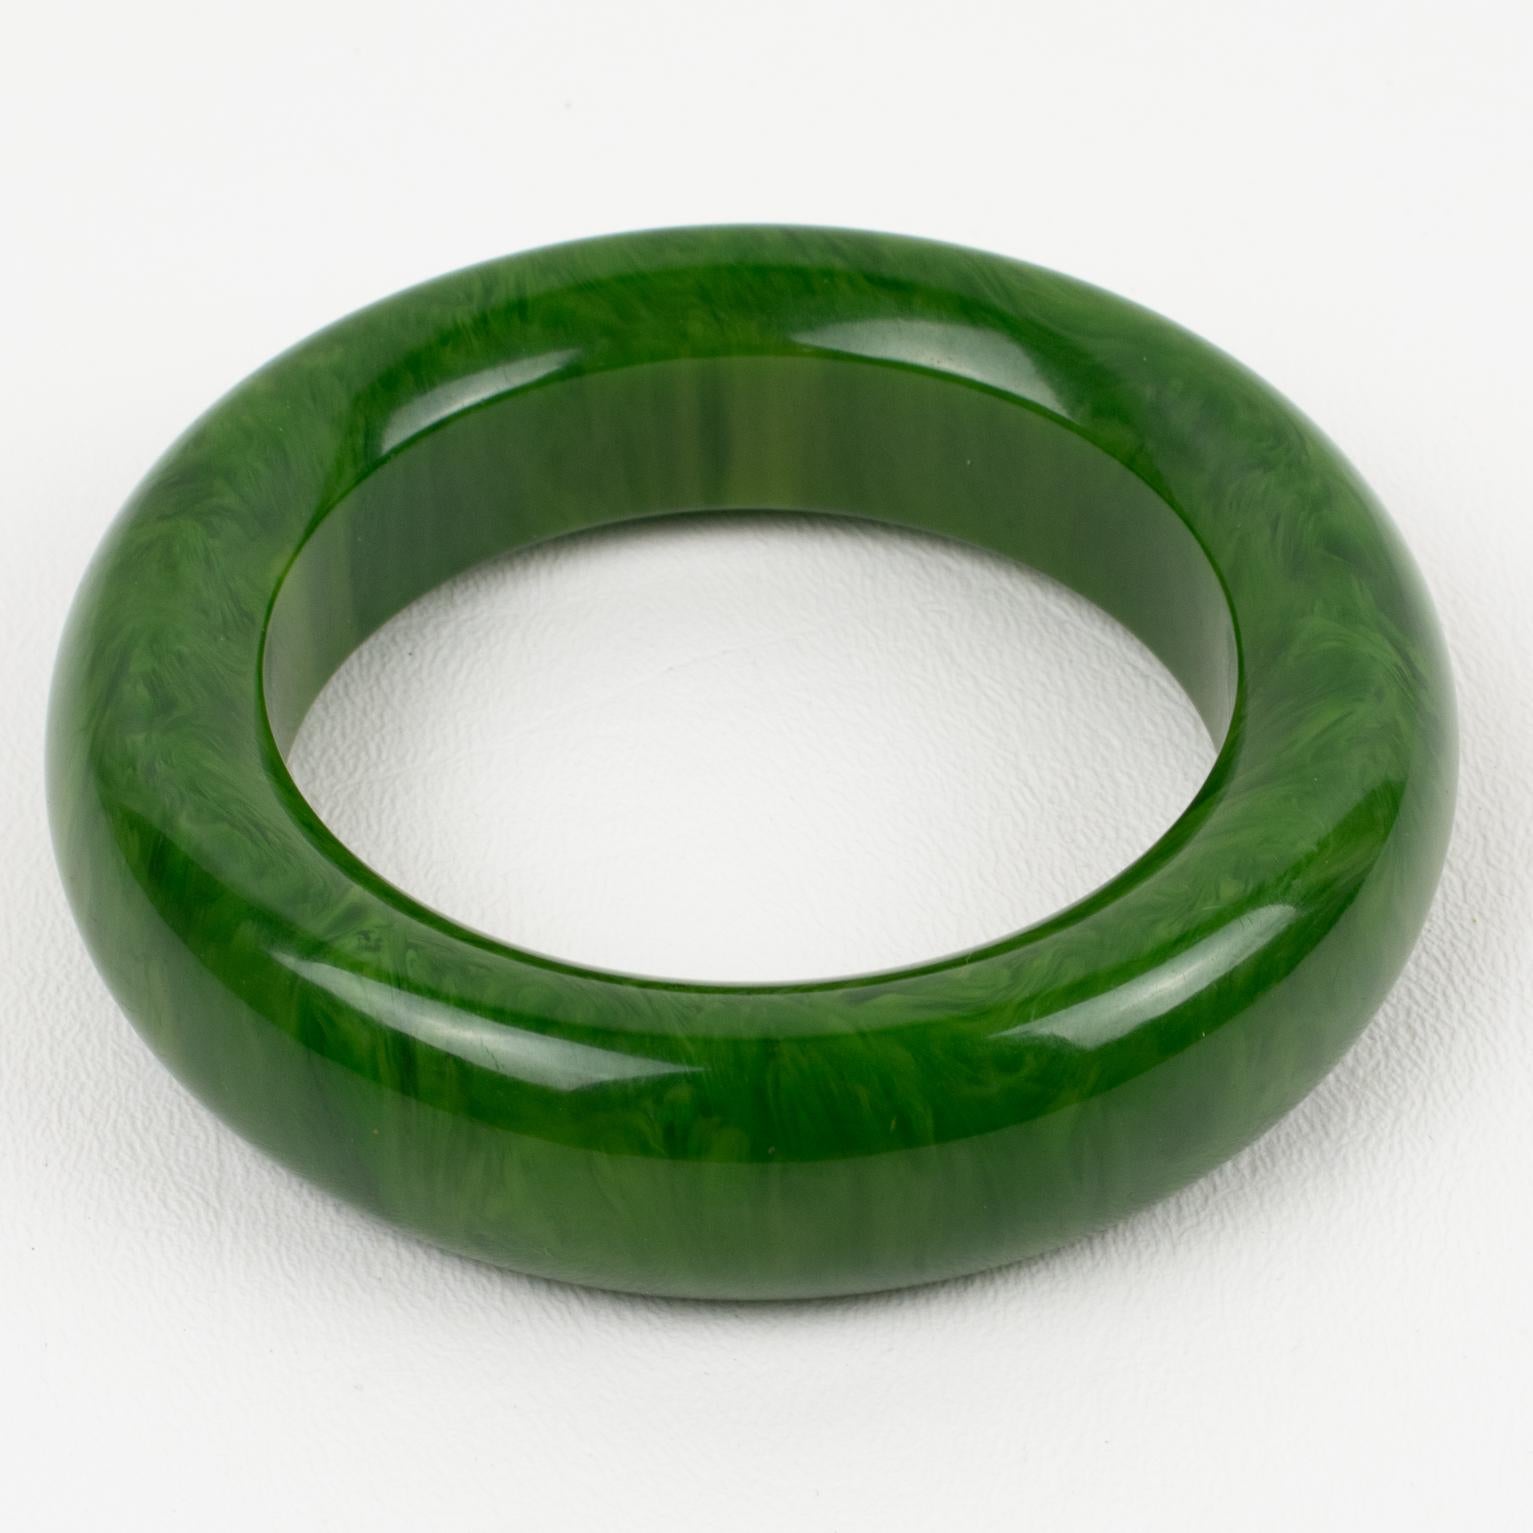 Spectacular green moss marble Bakelite bracelet bangle. Chunky domed shape with an extra thick wall. Intense green marble tone with lighter green swirling. 
Measurements: Inside across is 2.44 in. diameter (6.2 cm) - outside across is 3.63 in.